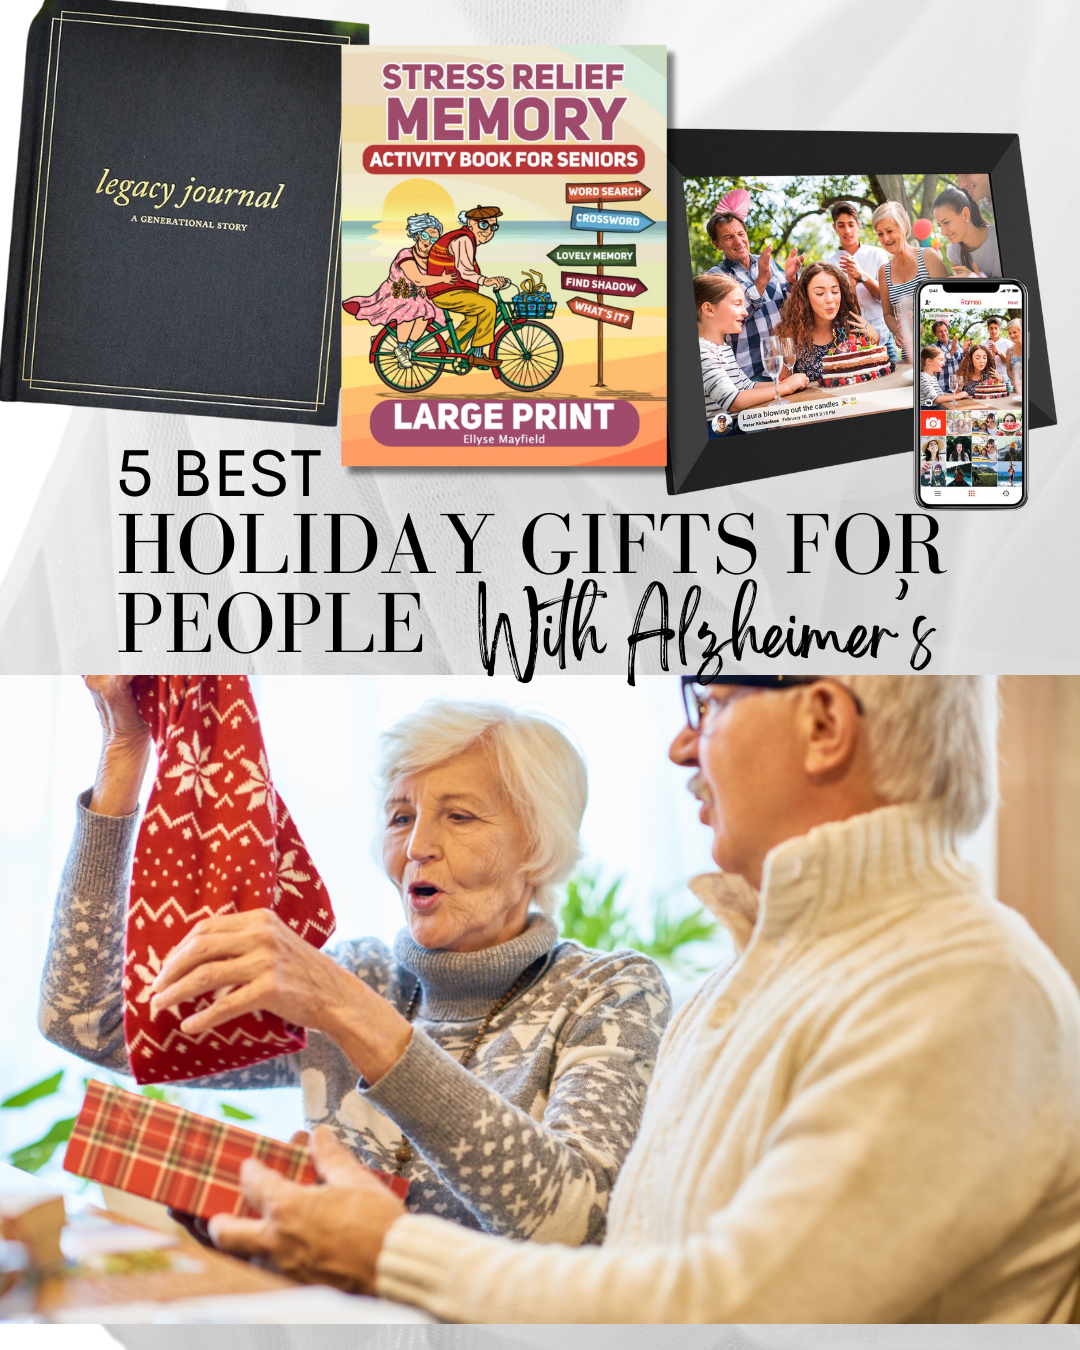 5 Best Holiday Gifts for People with Alzheimer's